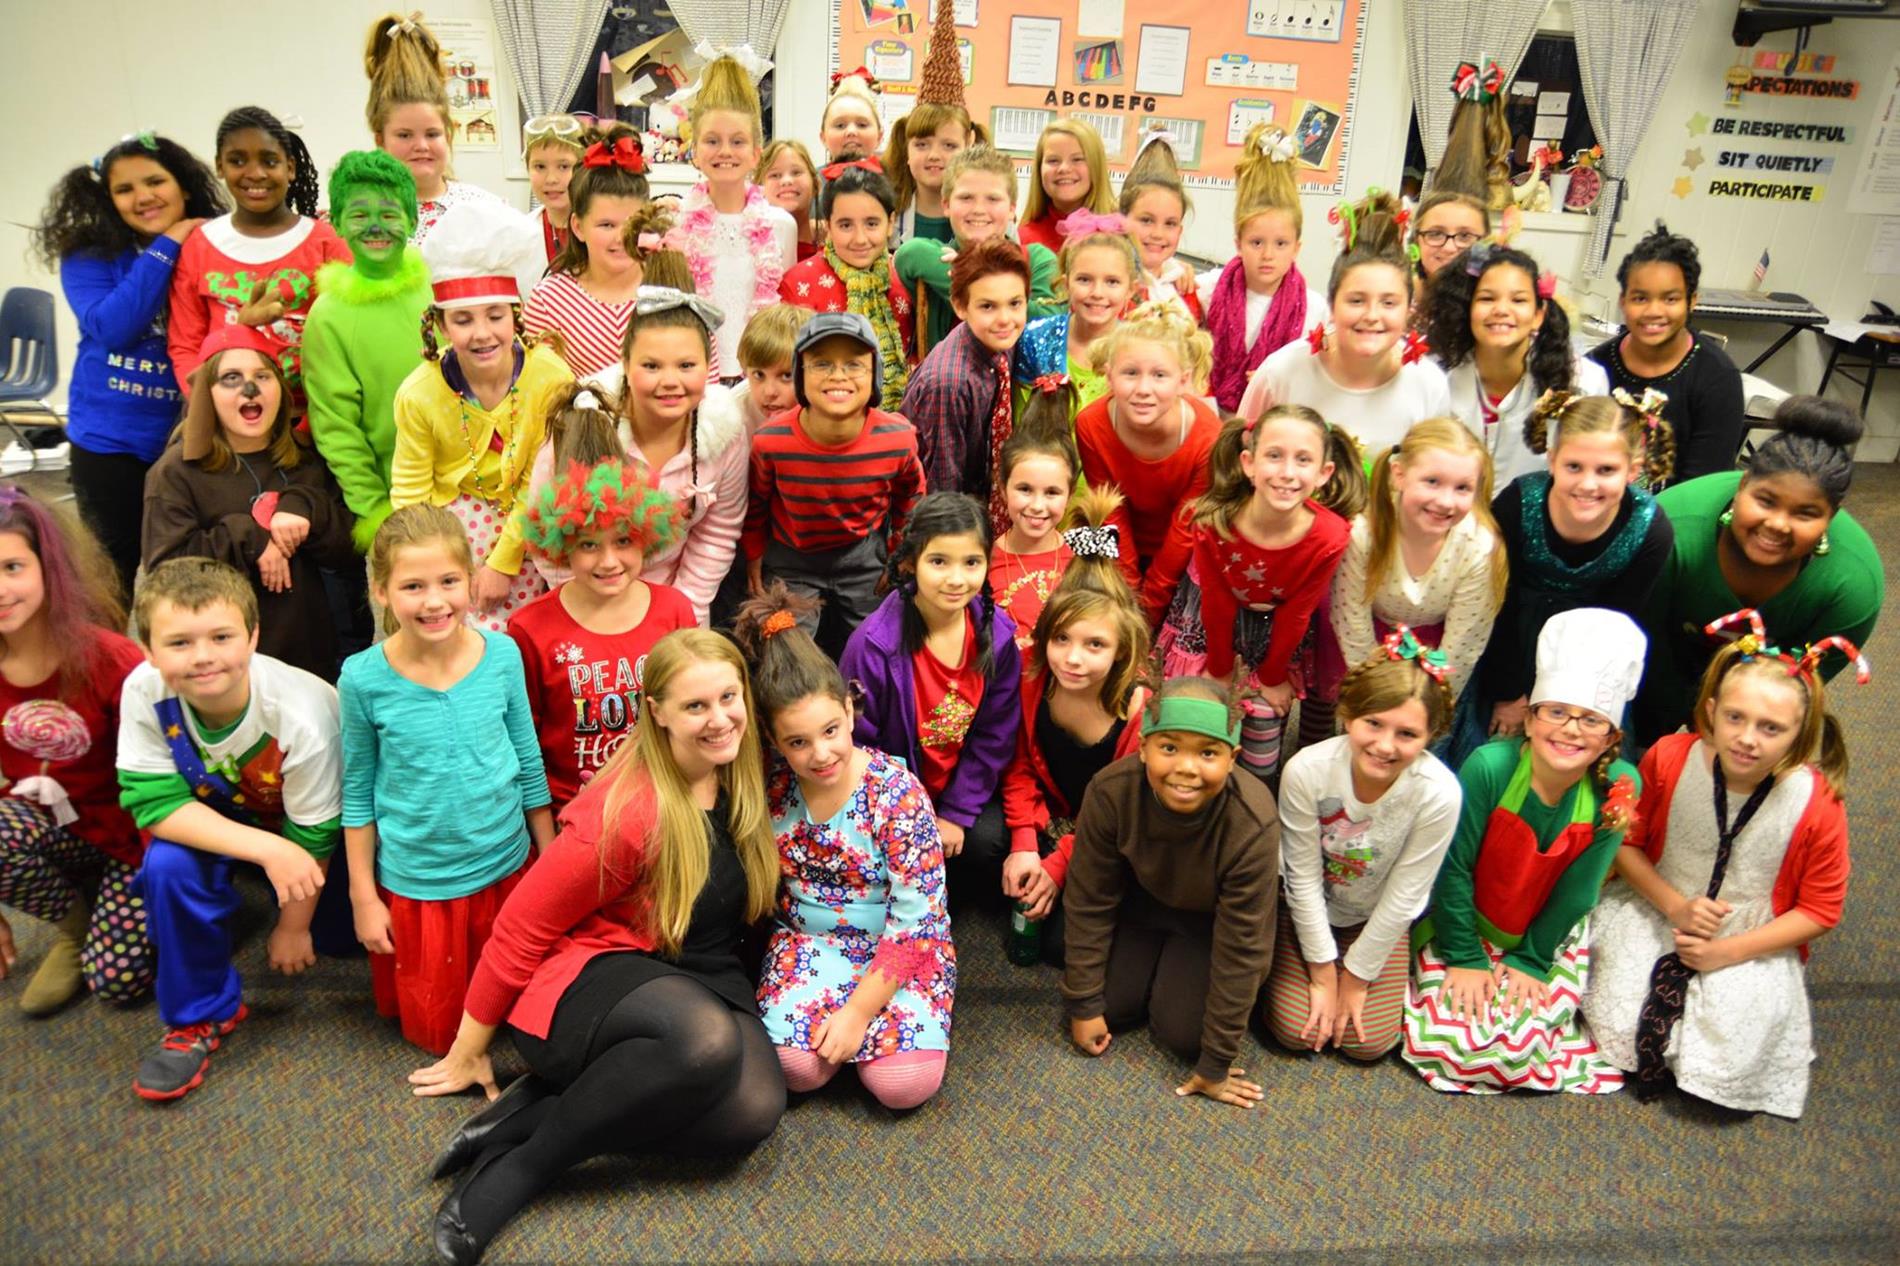 The Grinch Cast